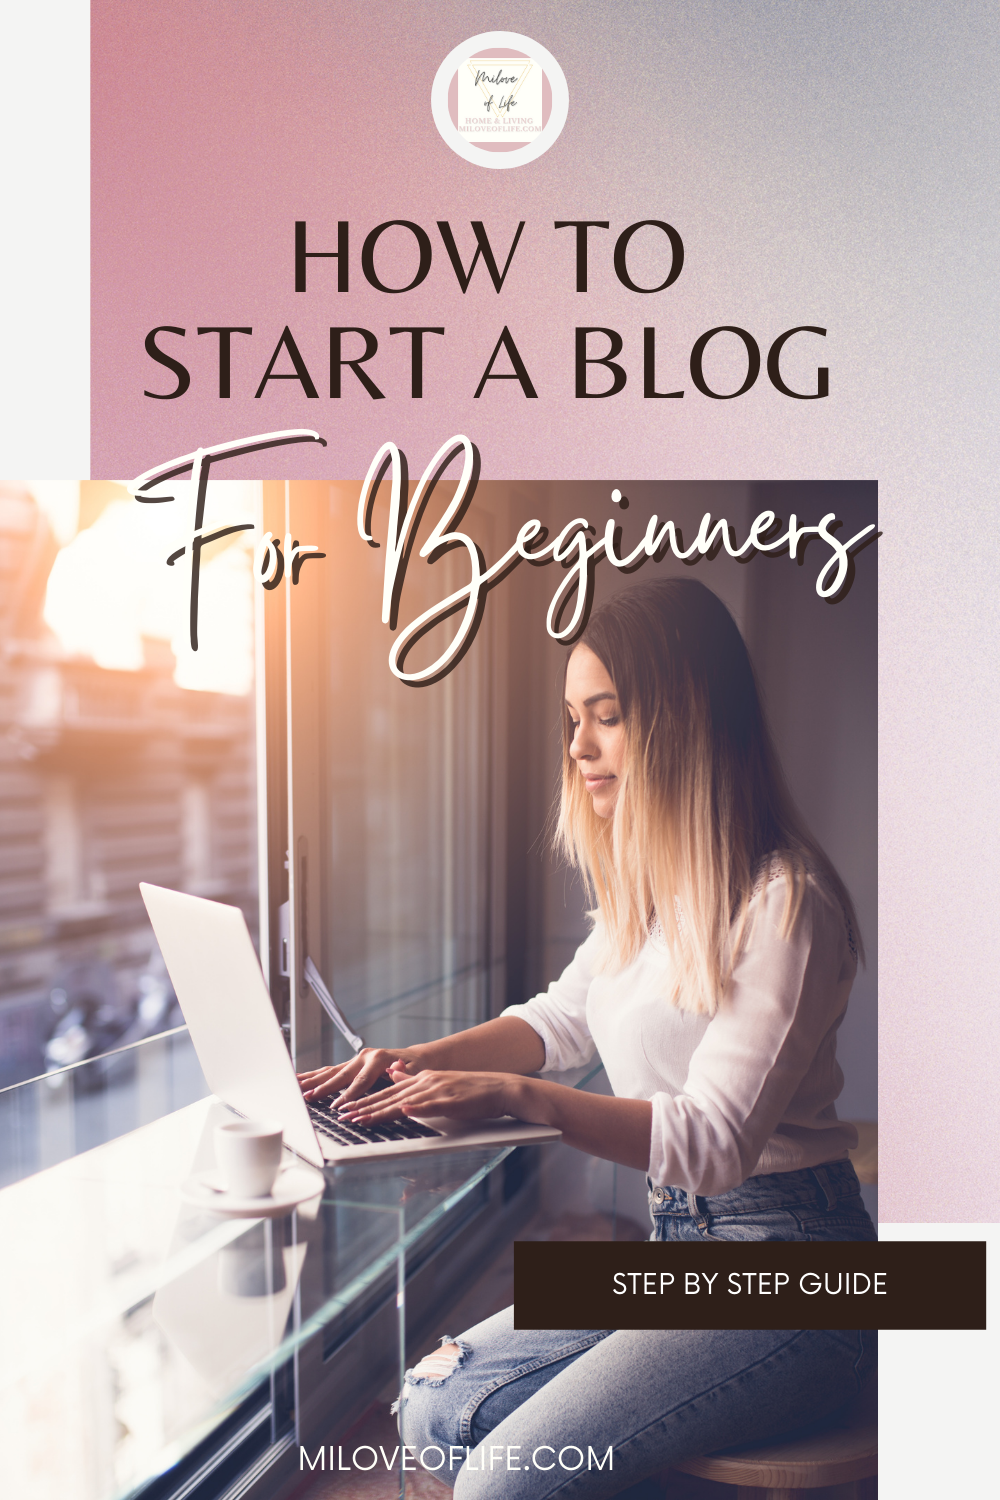 HOW TO START A BLOG: Complete Guide for Beginners 2021!